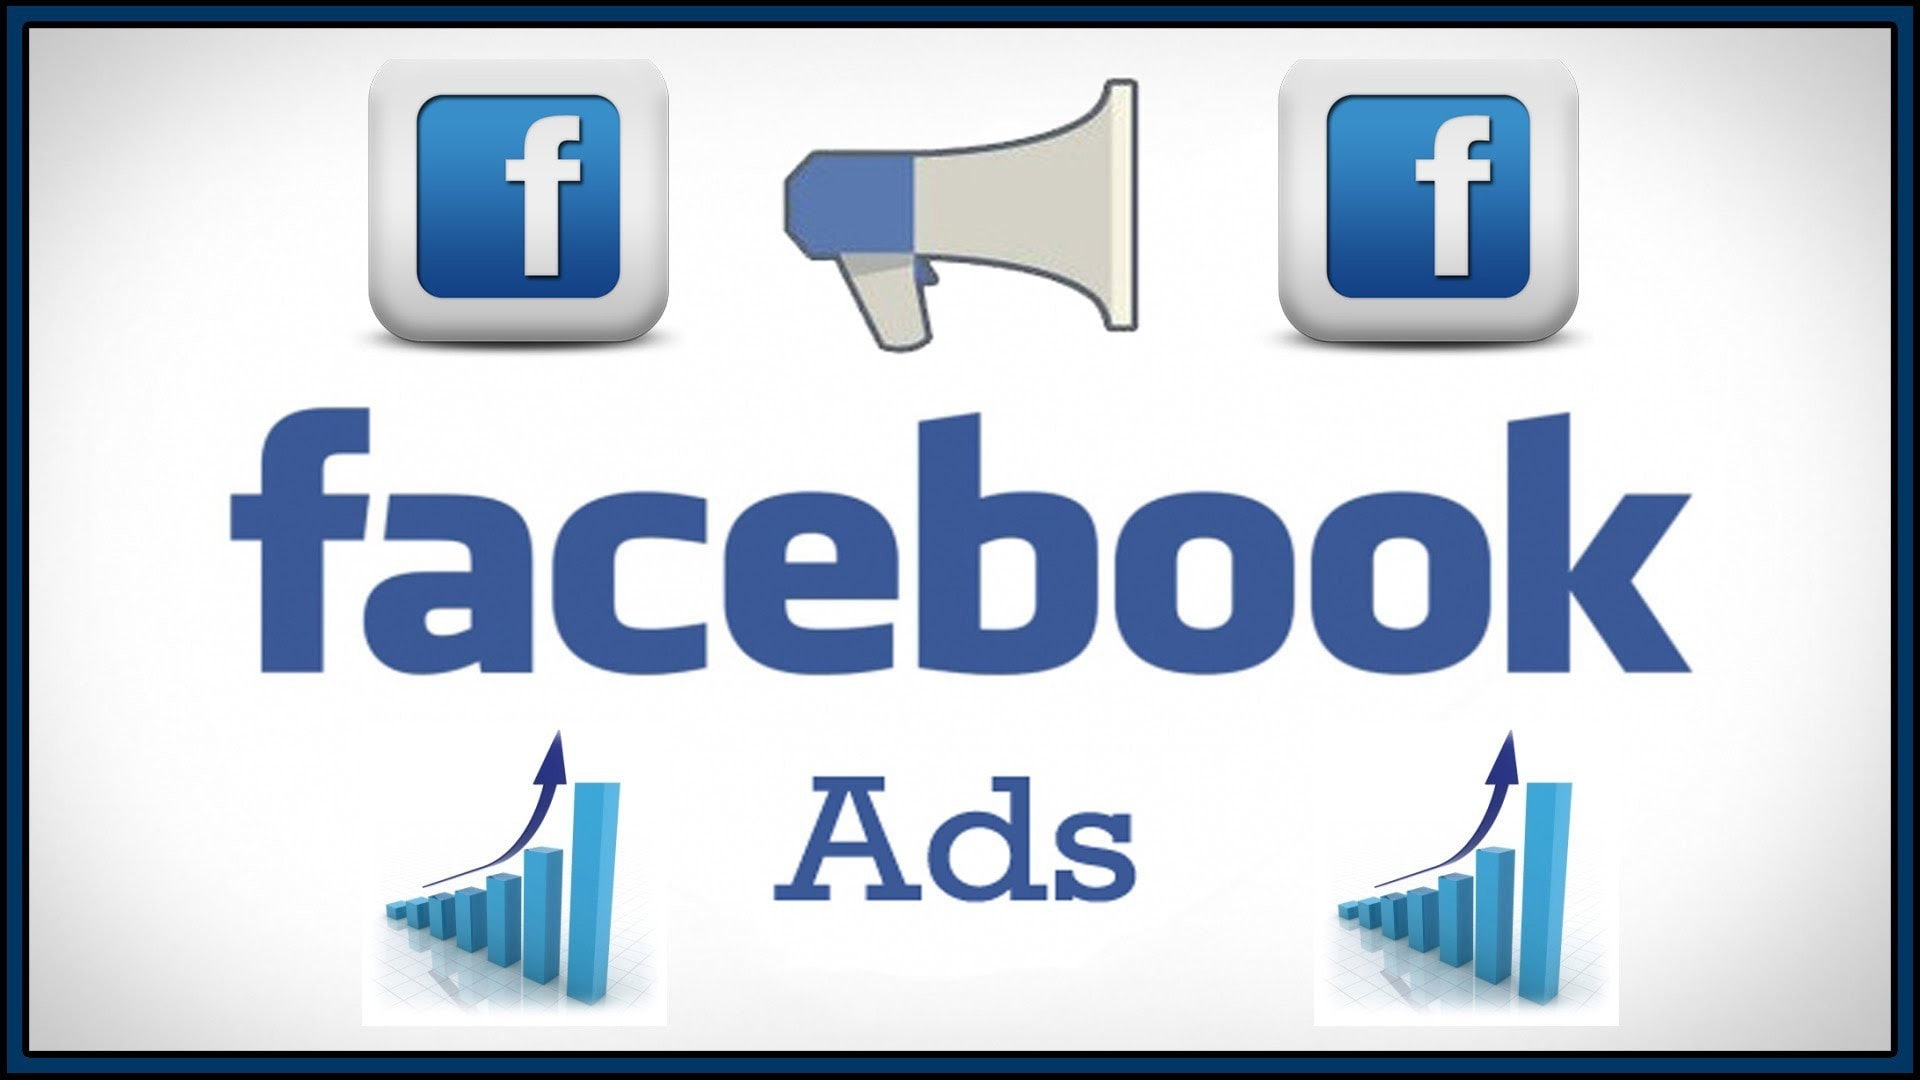 9 Strategies for Writing Your Best Facebook Ads www isdmmt com